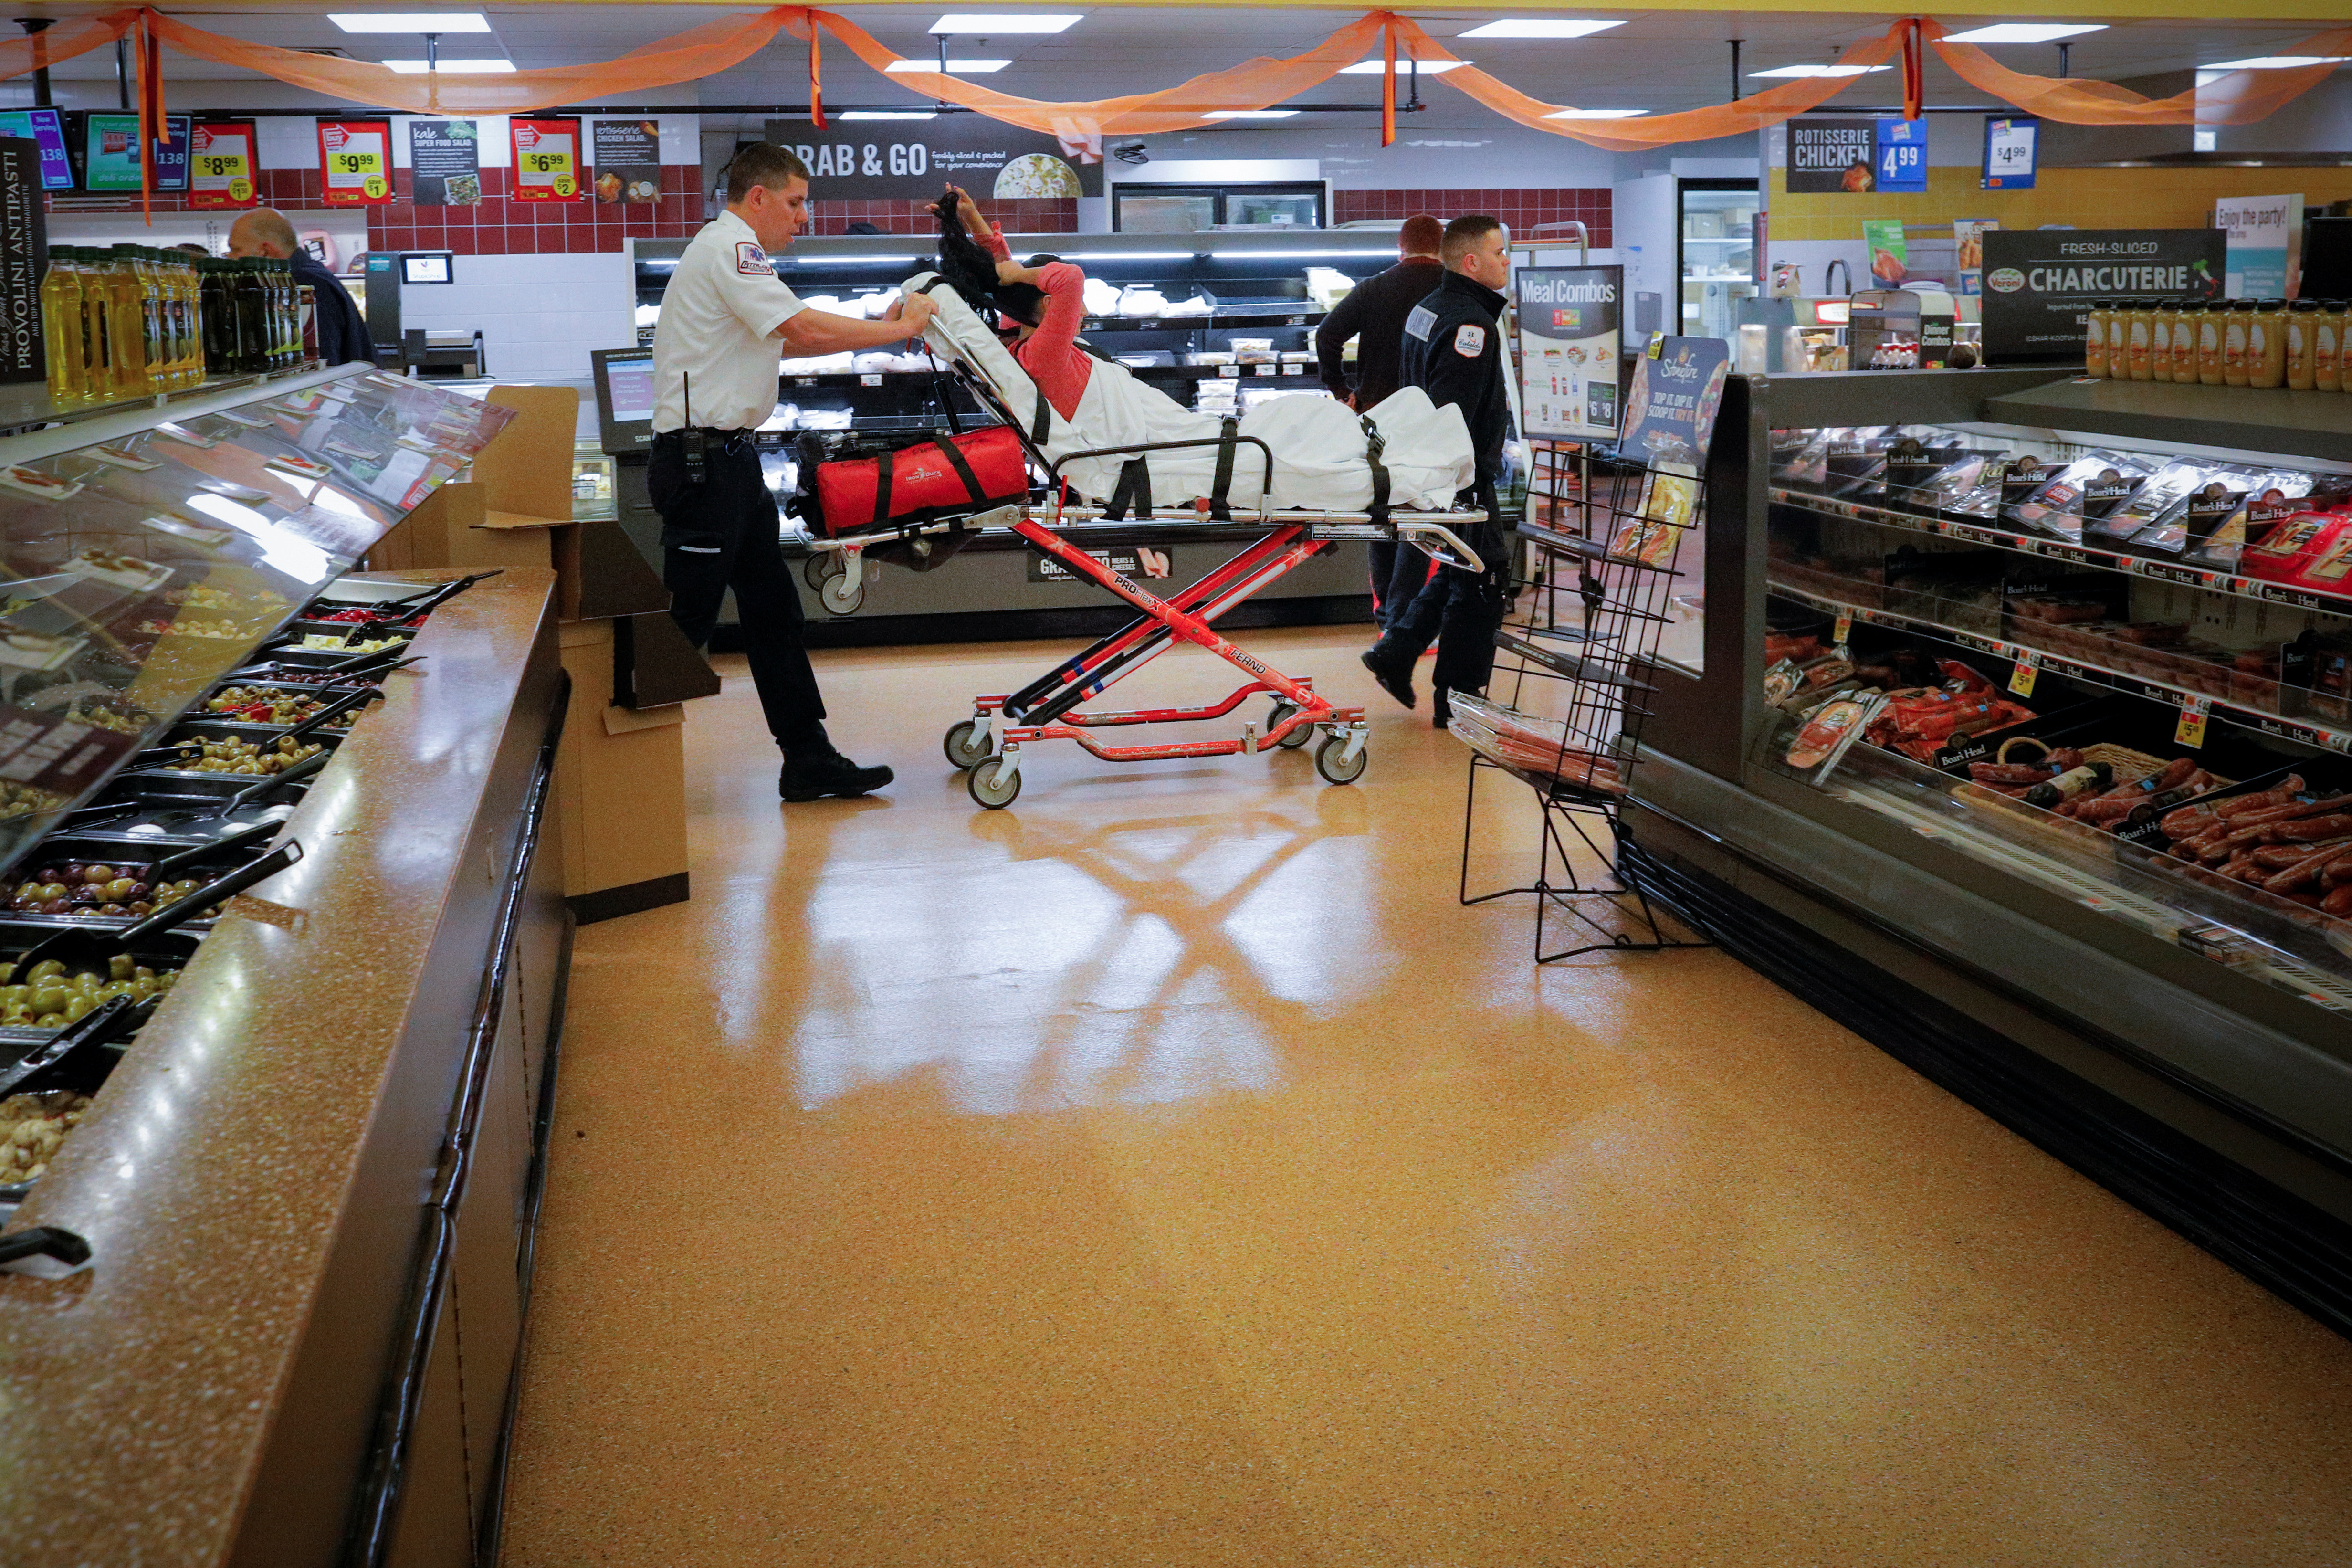 Cataldo Ambulance medics Ricky Cormio (L) and Luke Magnant take a 40-year-old woman out of a grocery store where she was found unresponsive in the store's bathroom after overdosing on opioids in the Boston suburb of Malden